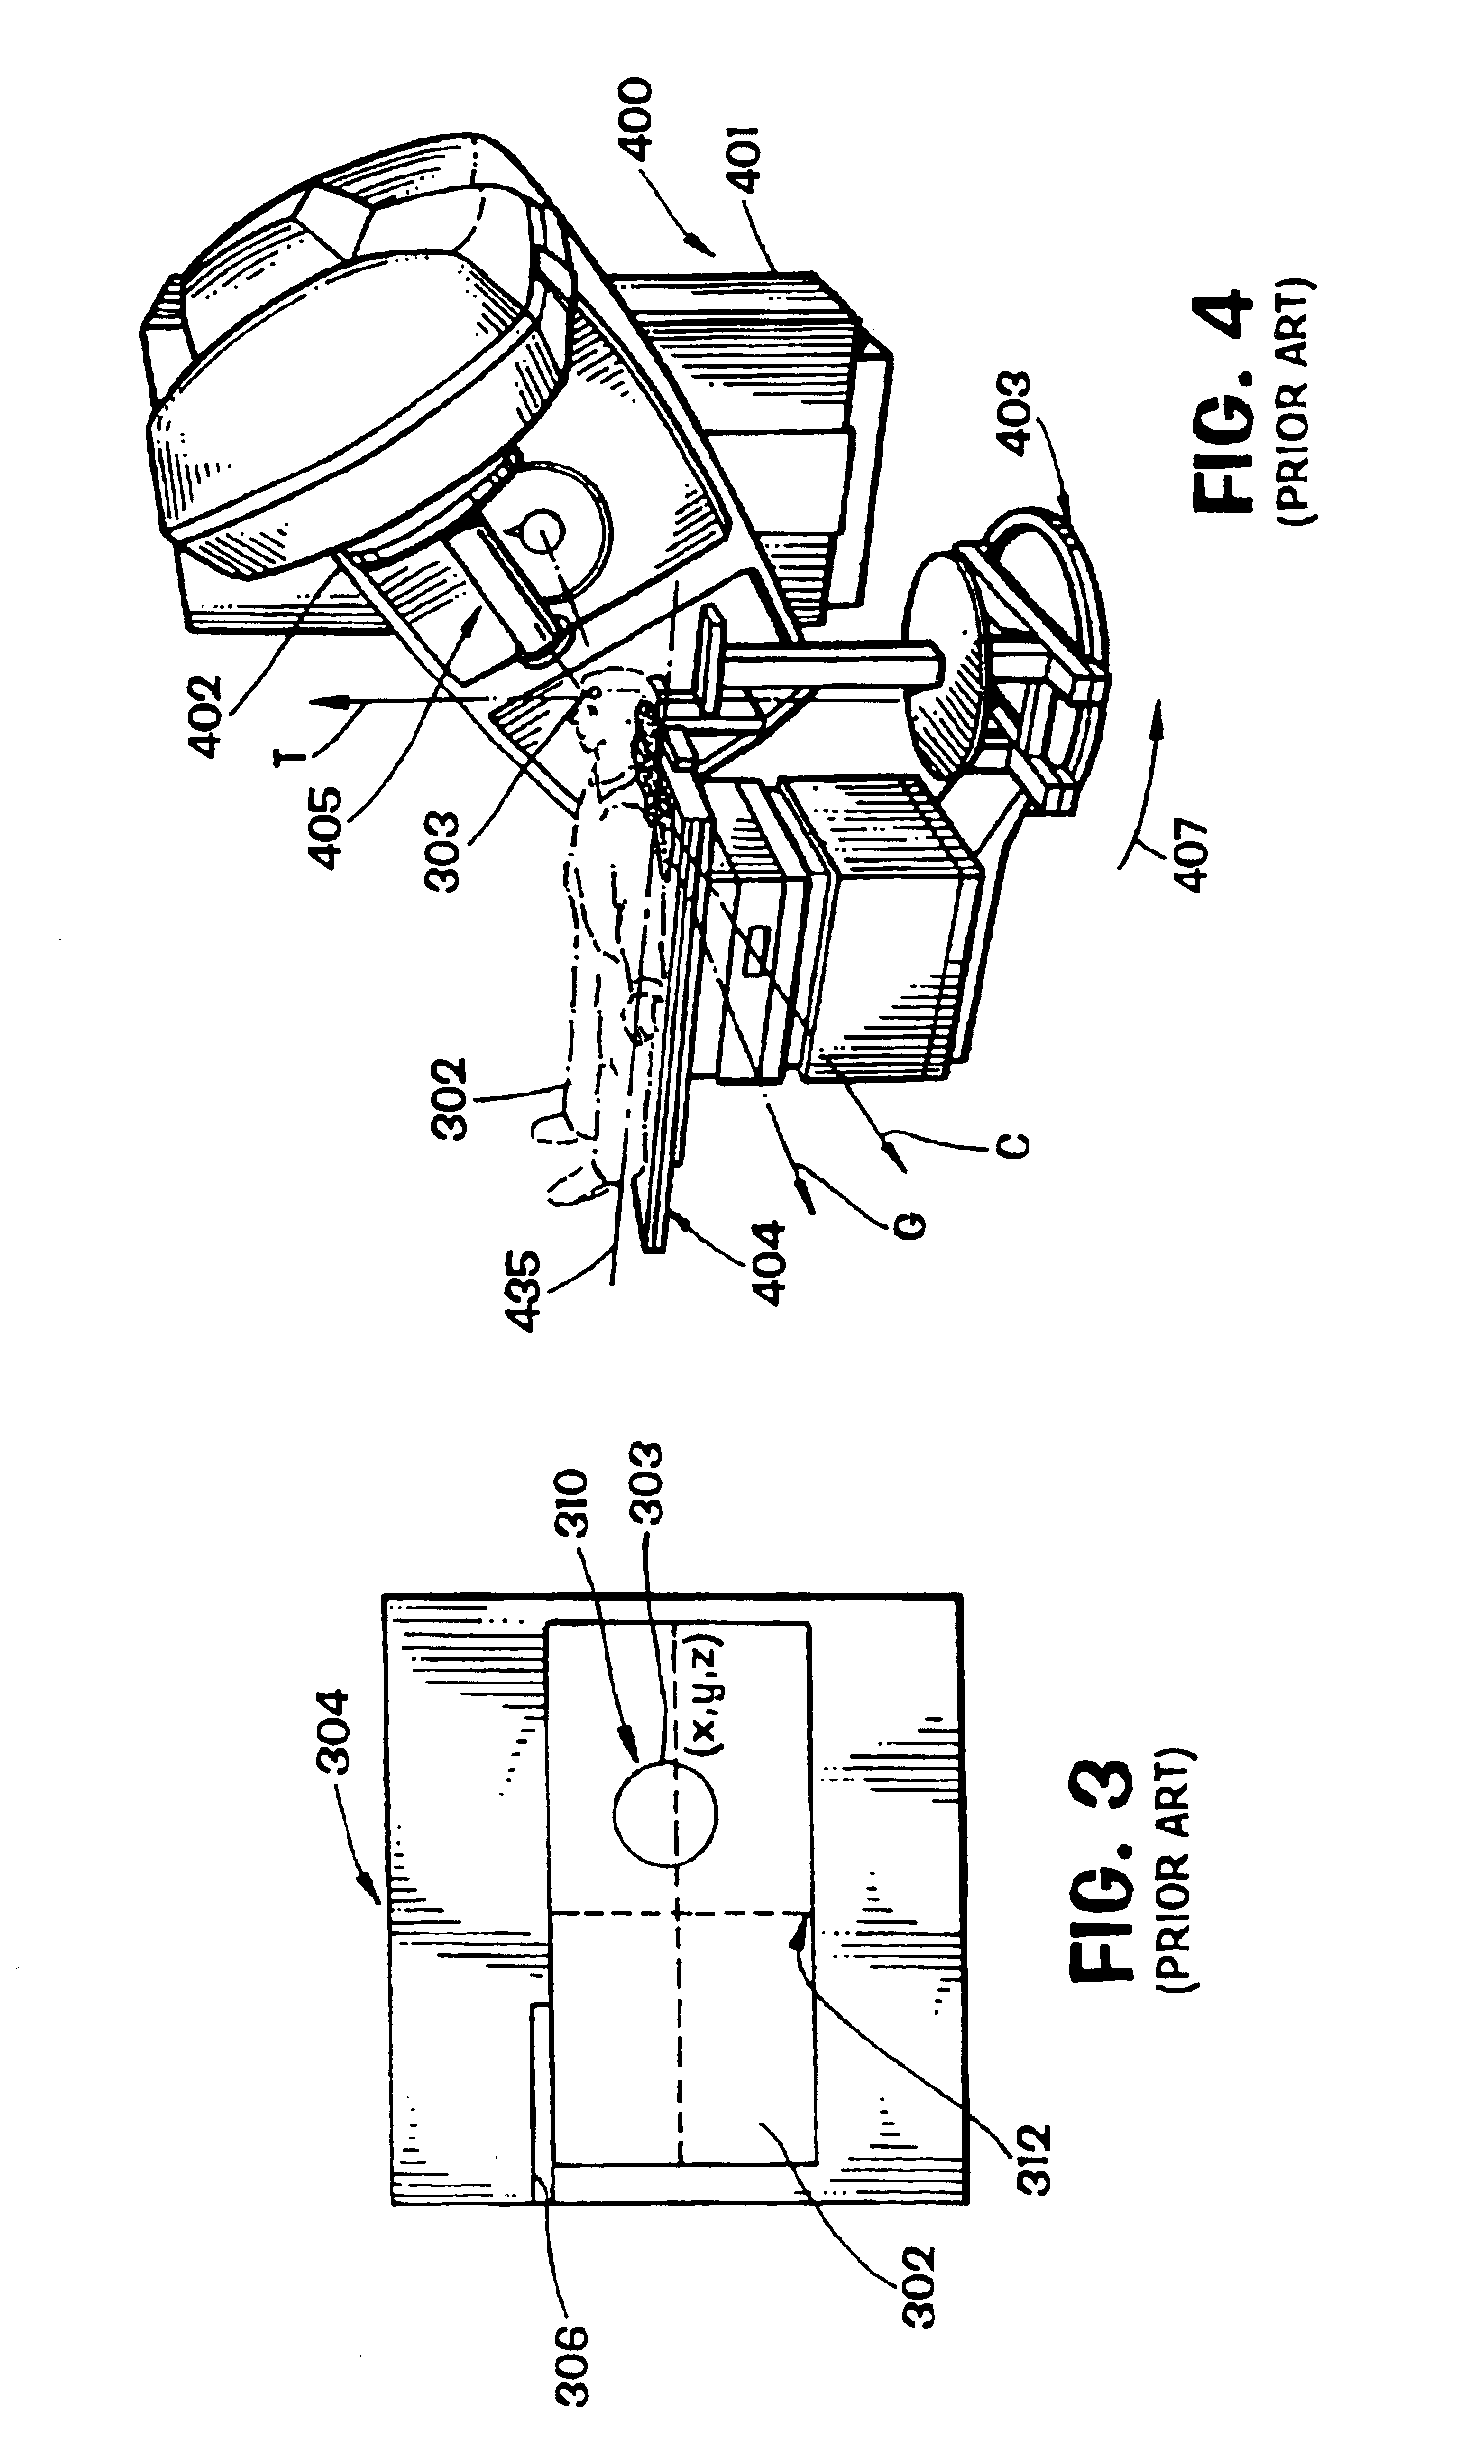 Method and apparatus for target position verification